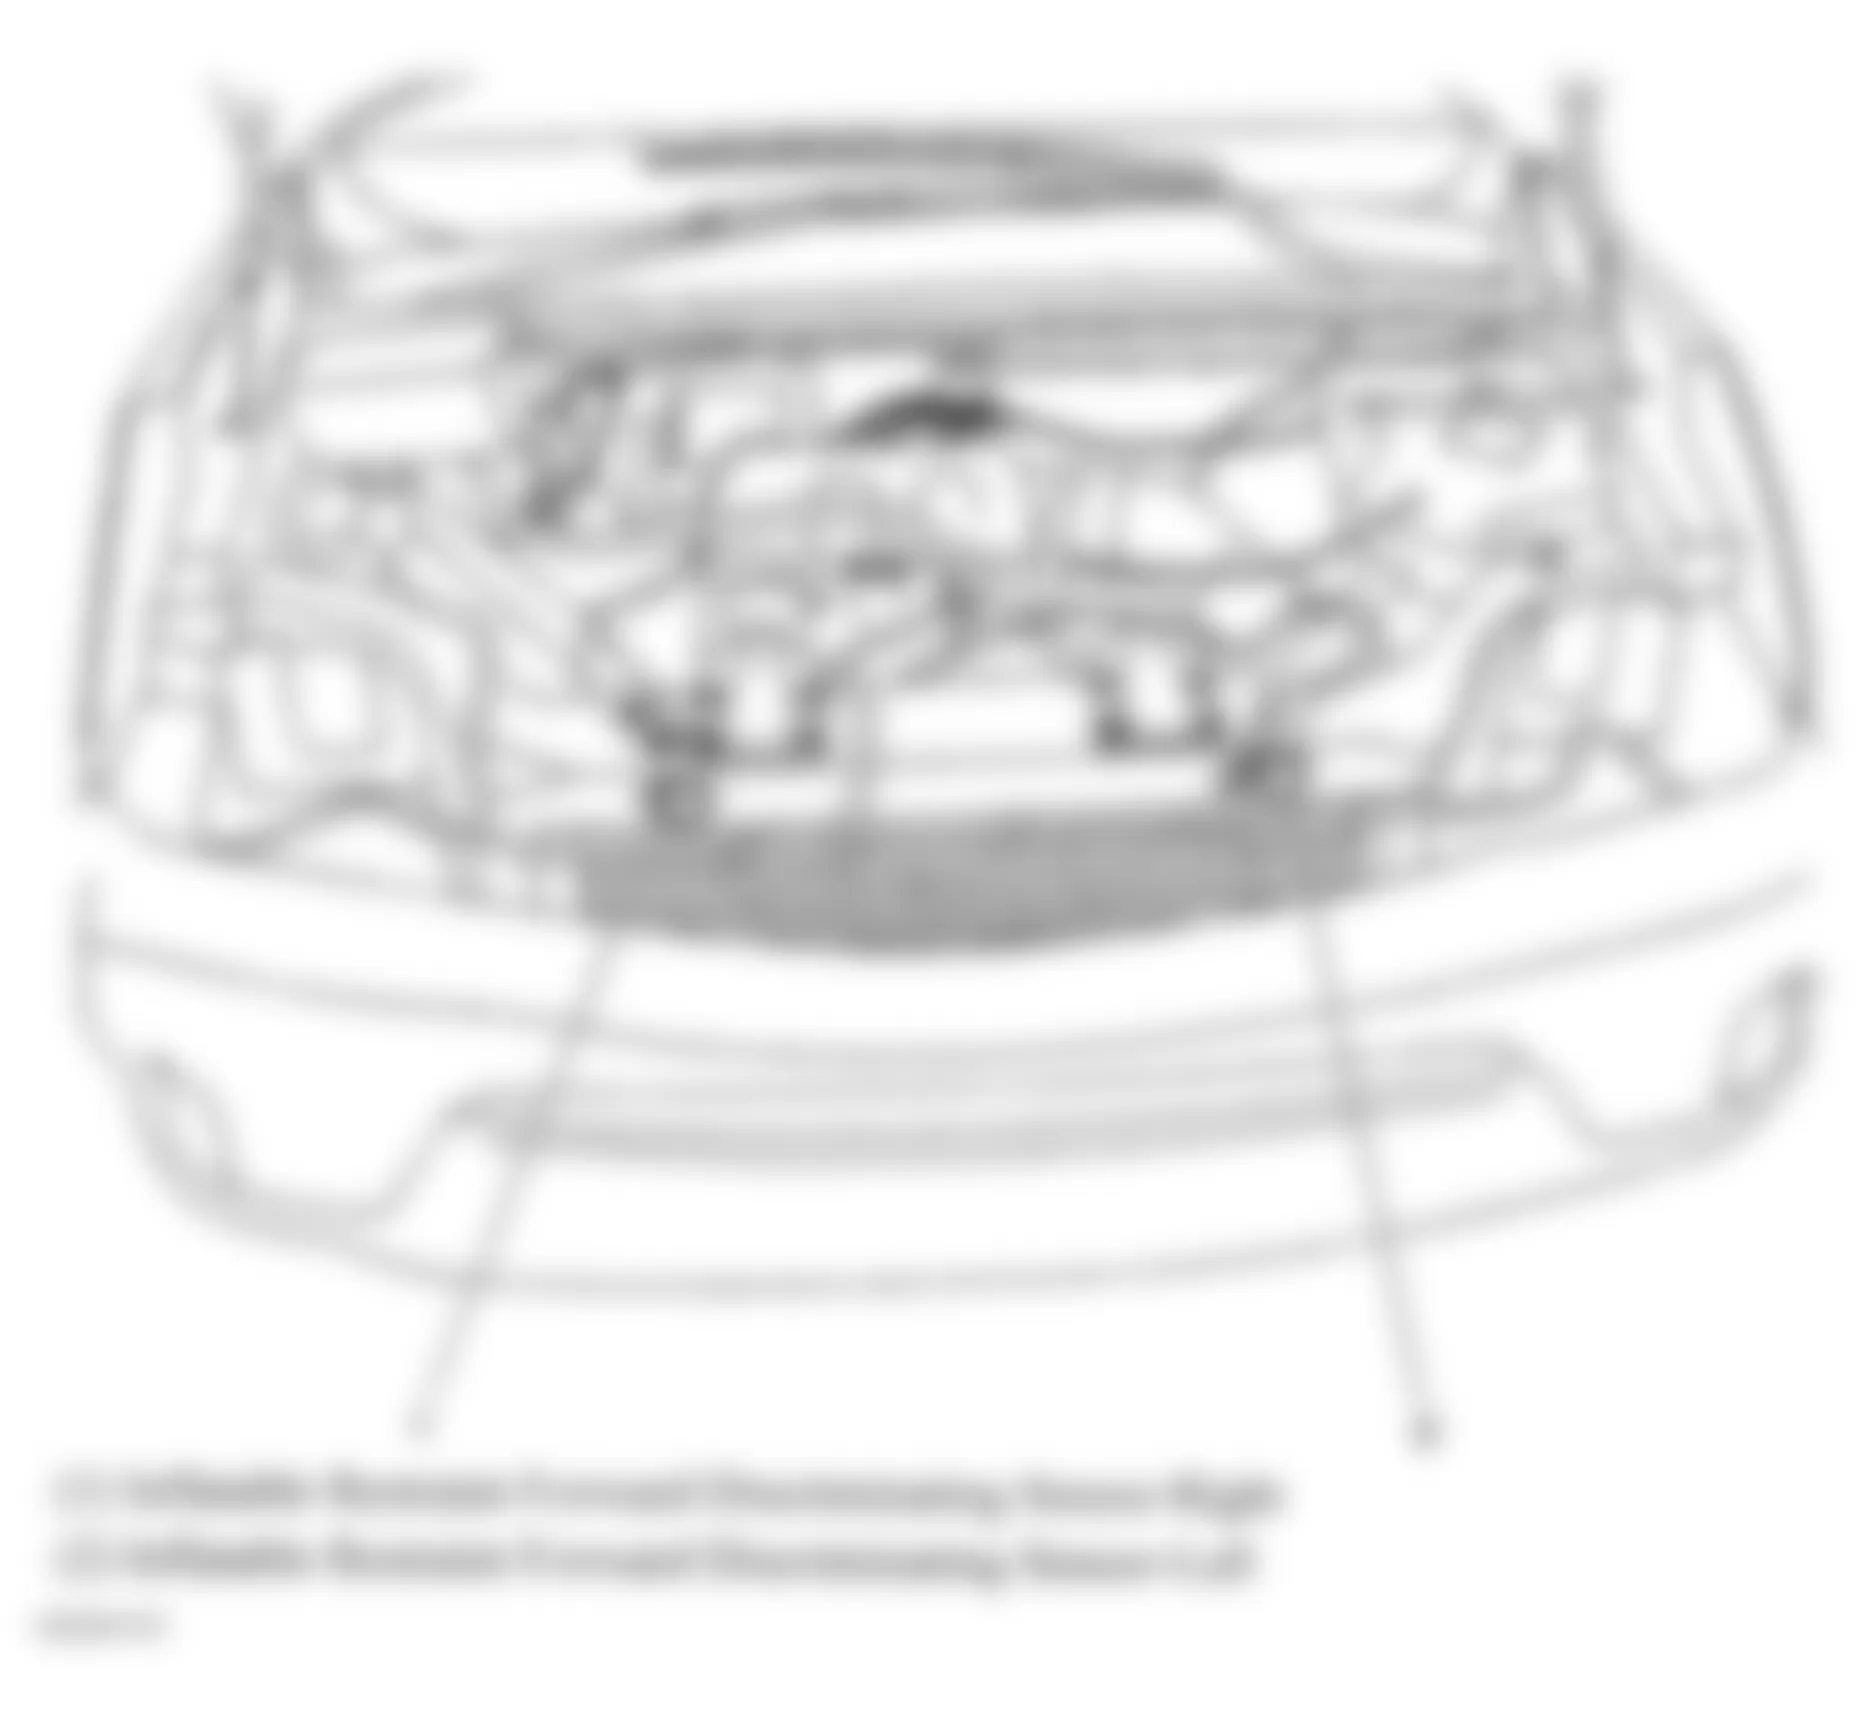 Buick Rendezvous CXL 2006 - Component Locations -  Front Of Engine Compartment